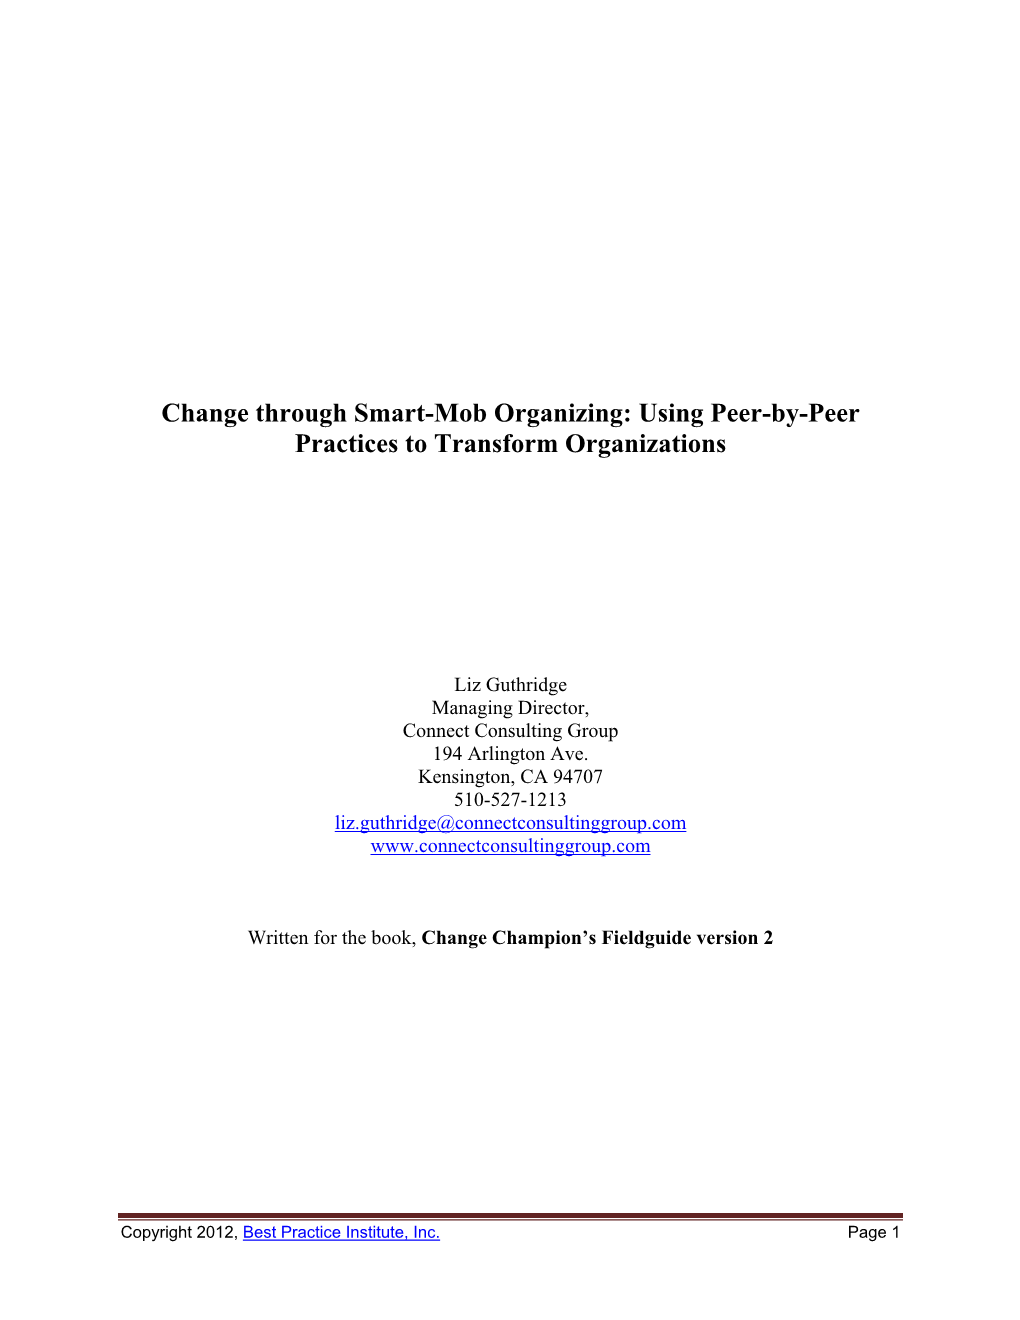 Change Through Smart-Mob Organizing: Using Peer-By-Peer Practices to Transform Organizations